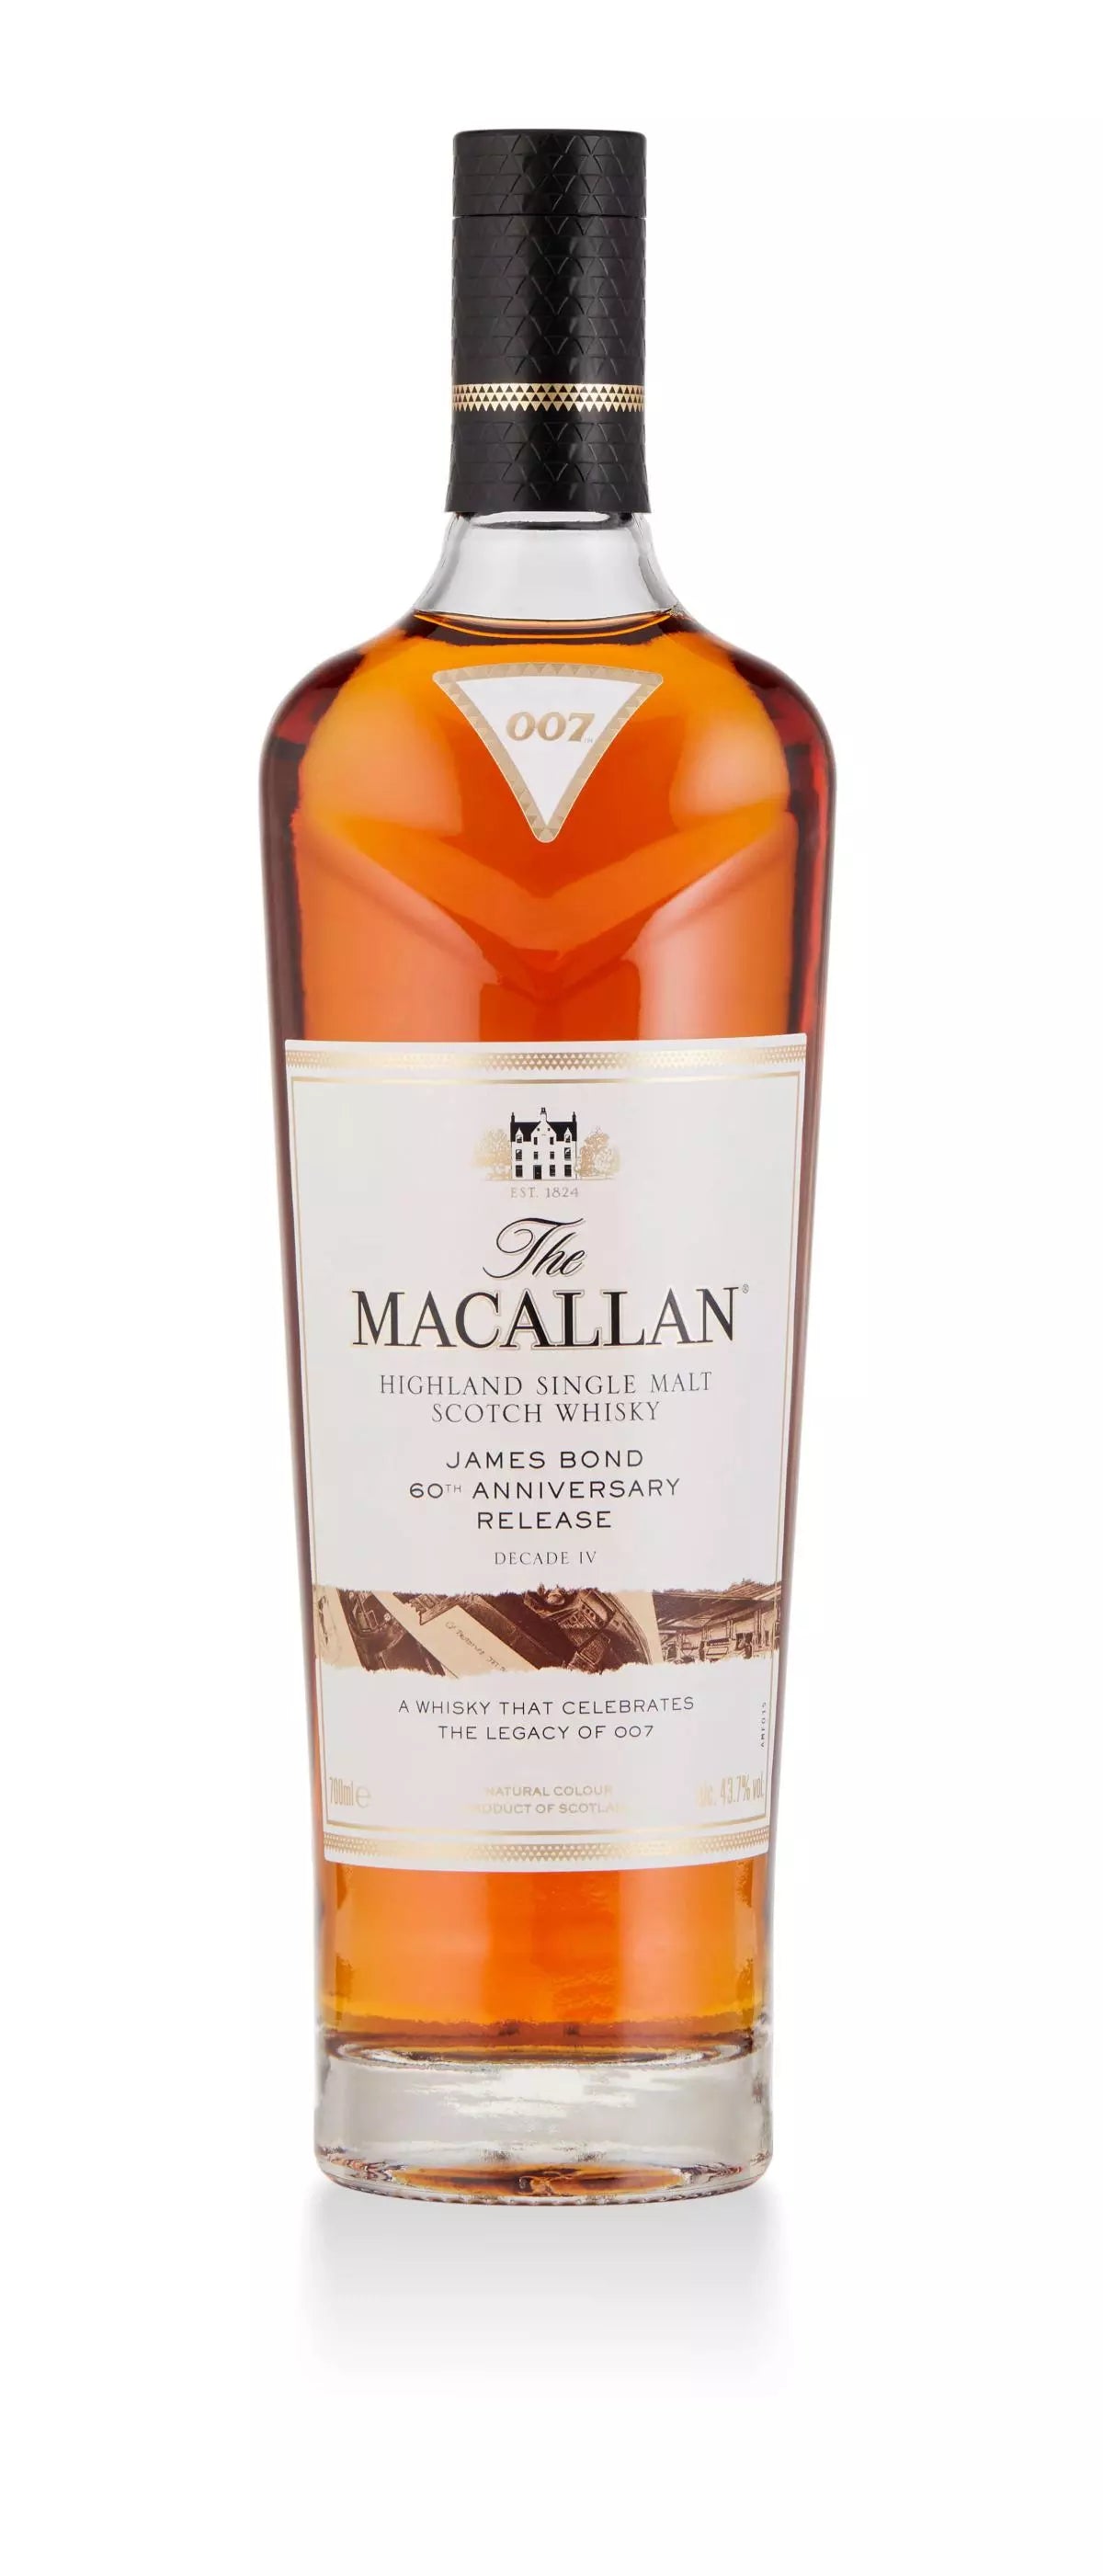 Macallan James Bond 60th Anniversary Release Decade IV 700ml a tall clear glass bottle with a white label and black top